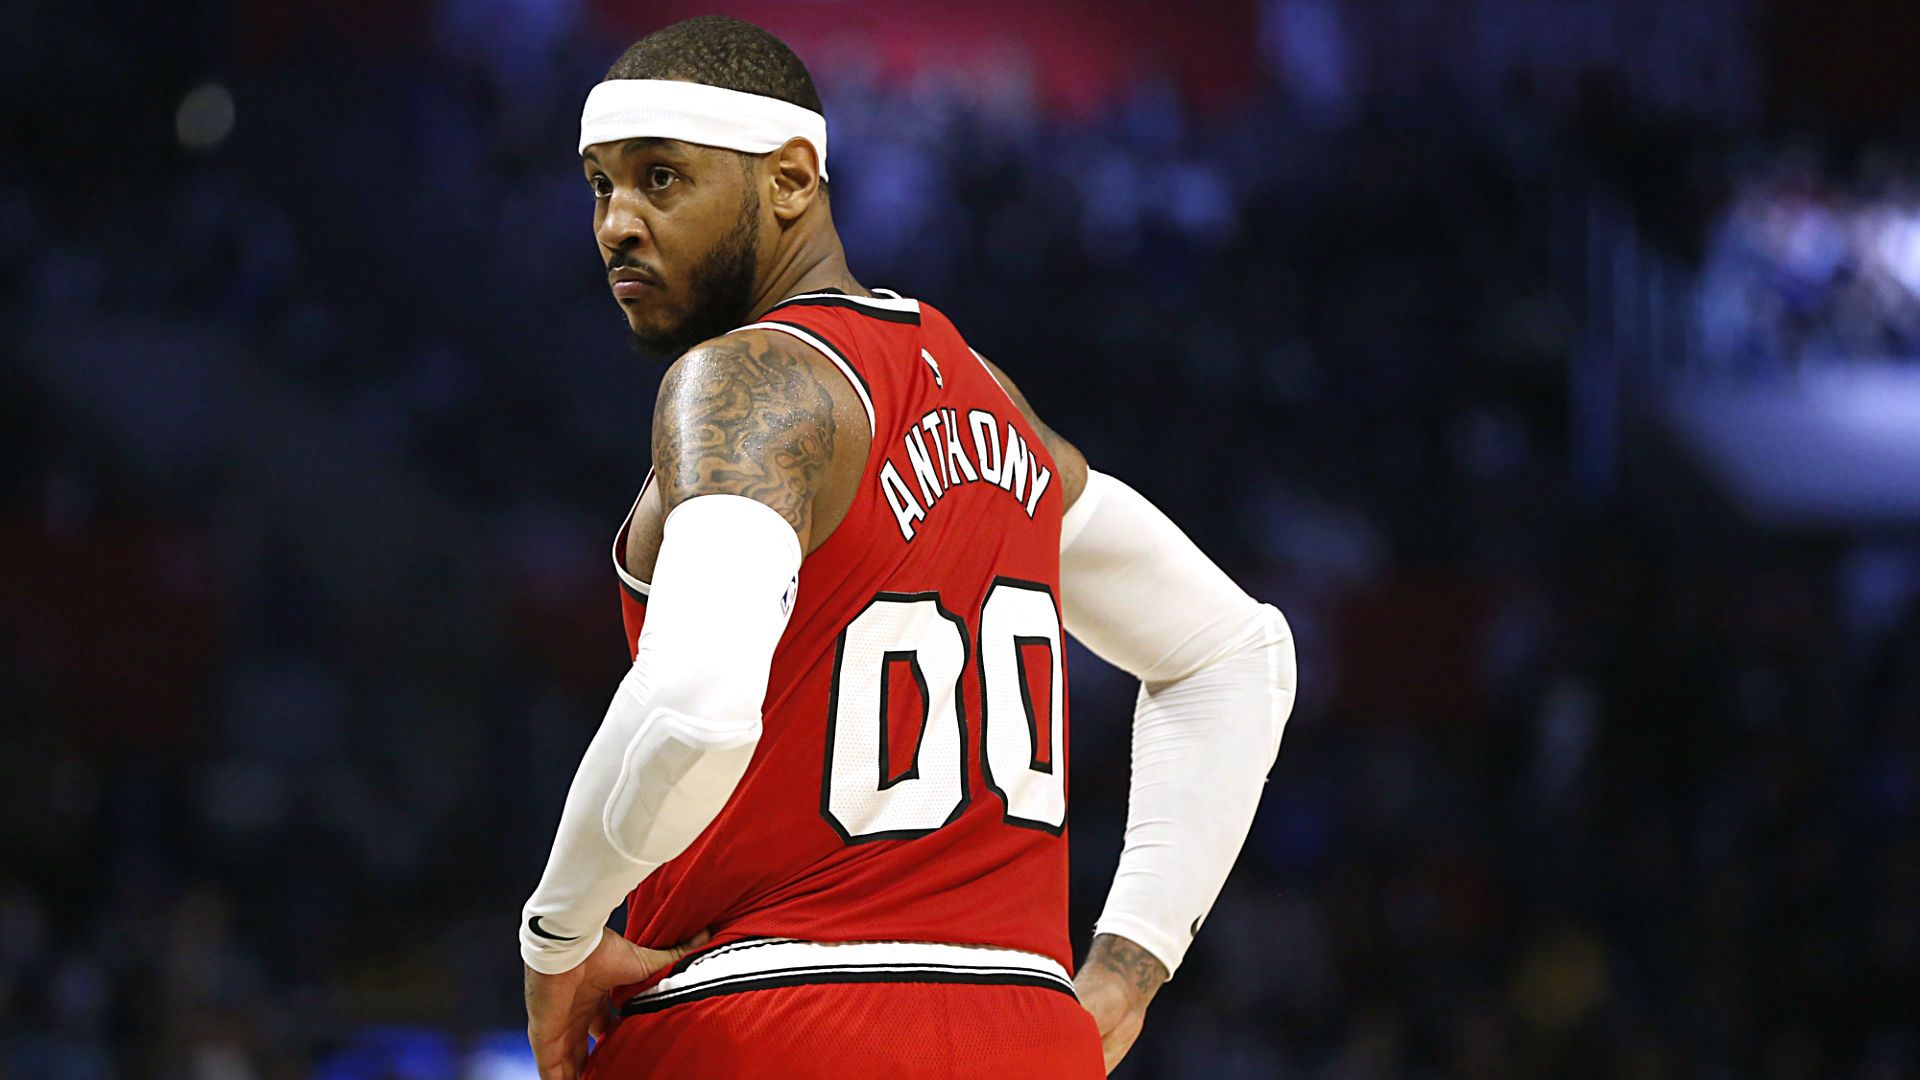 Carmelo Anthony isn't only player 'up in the air' on resumption